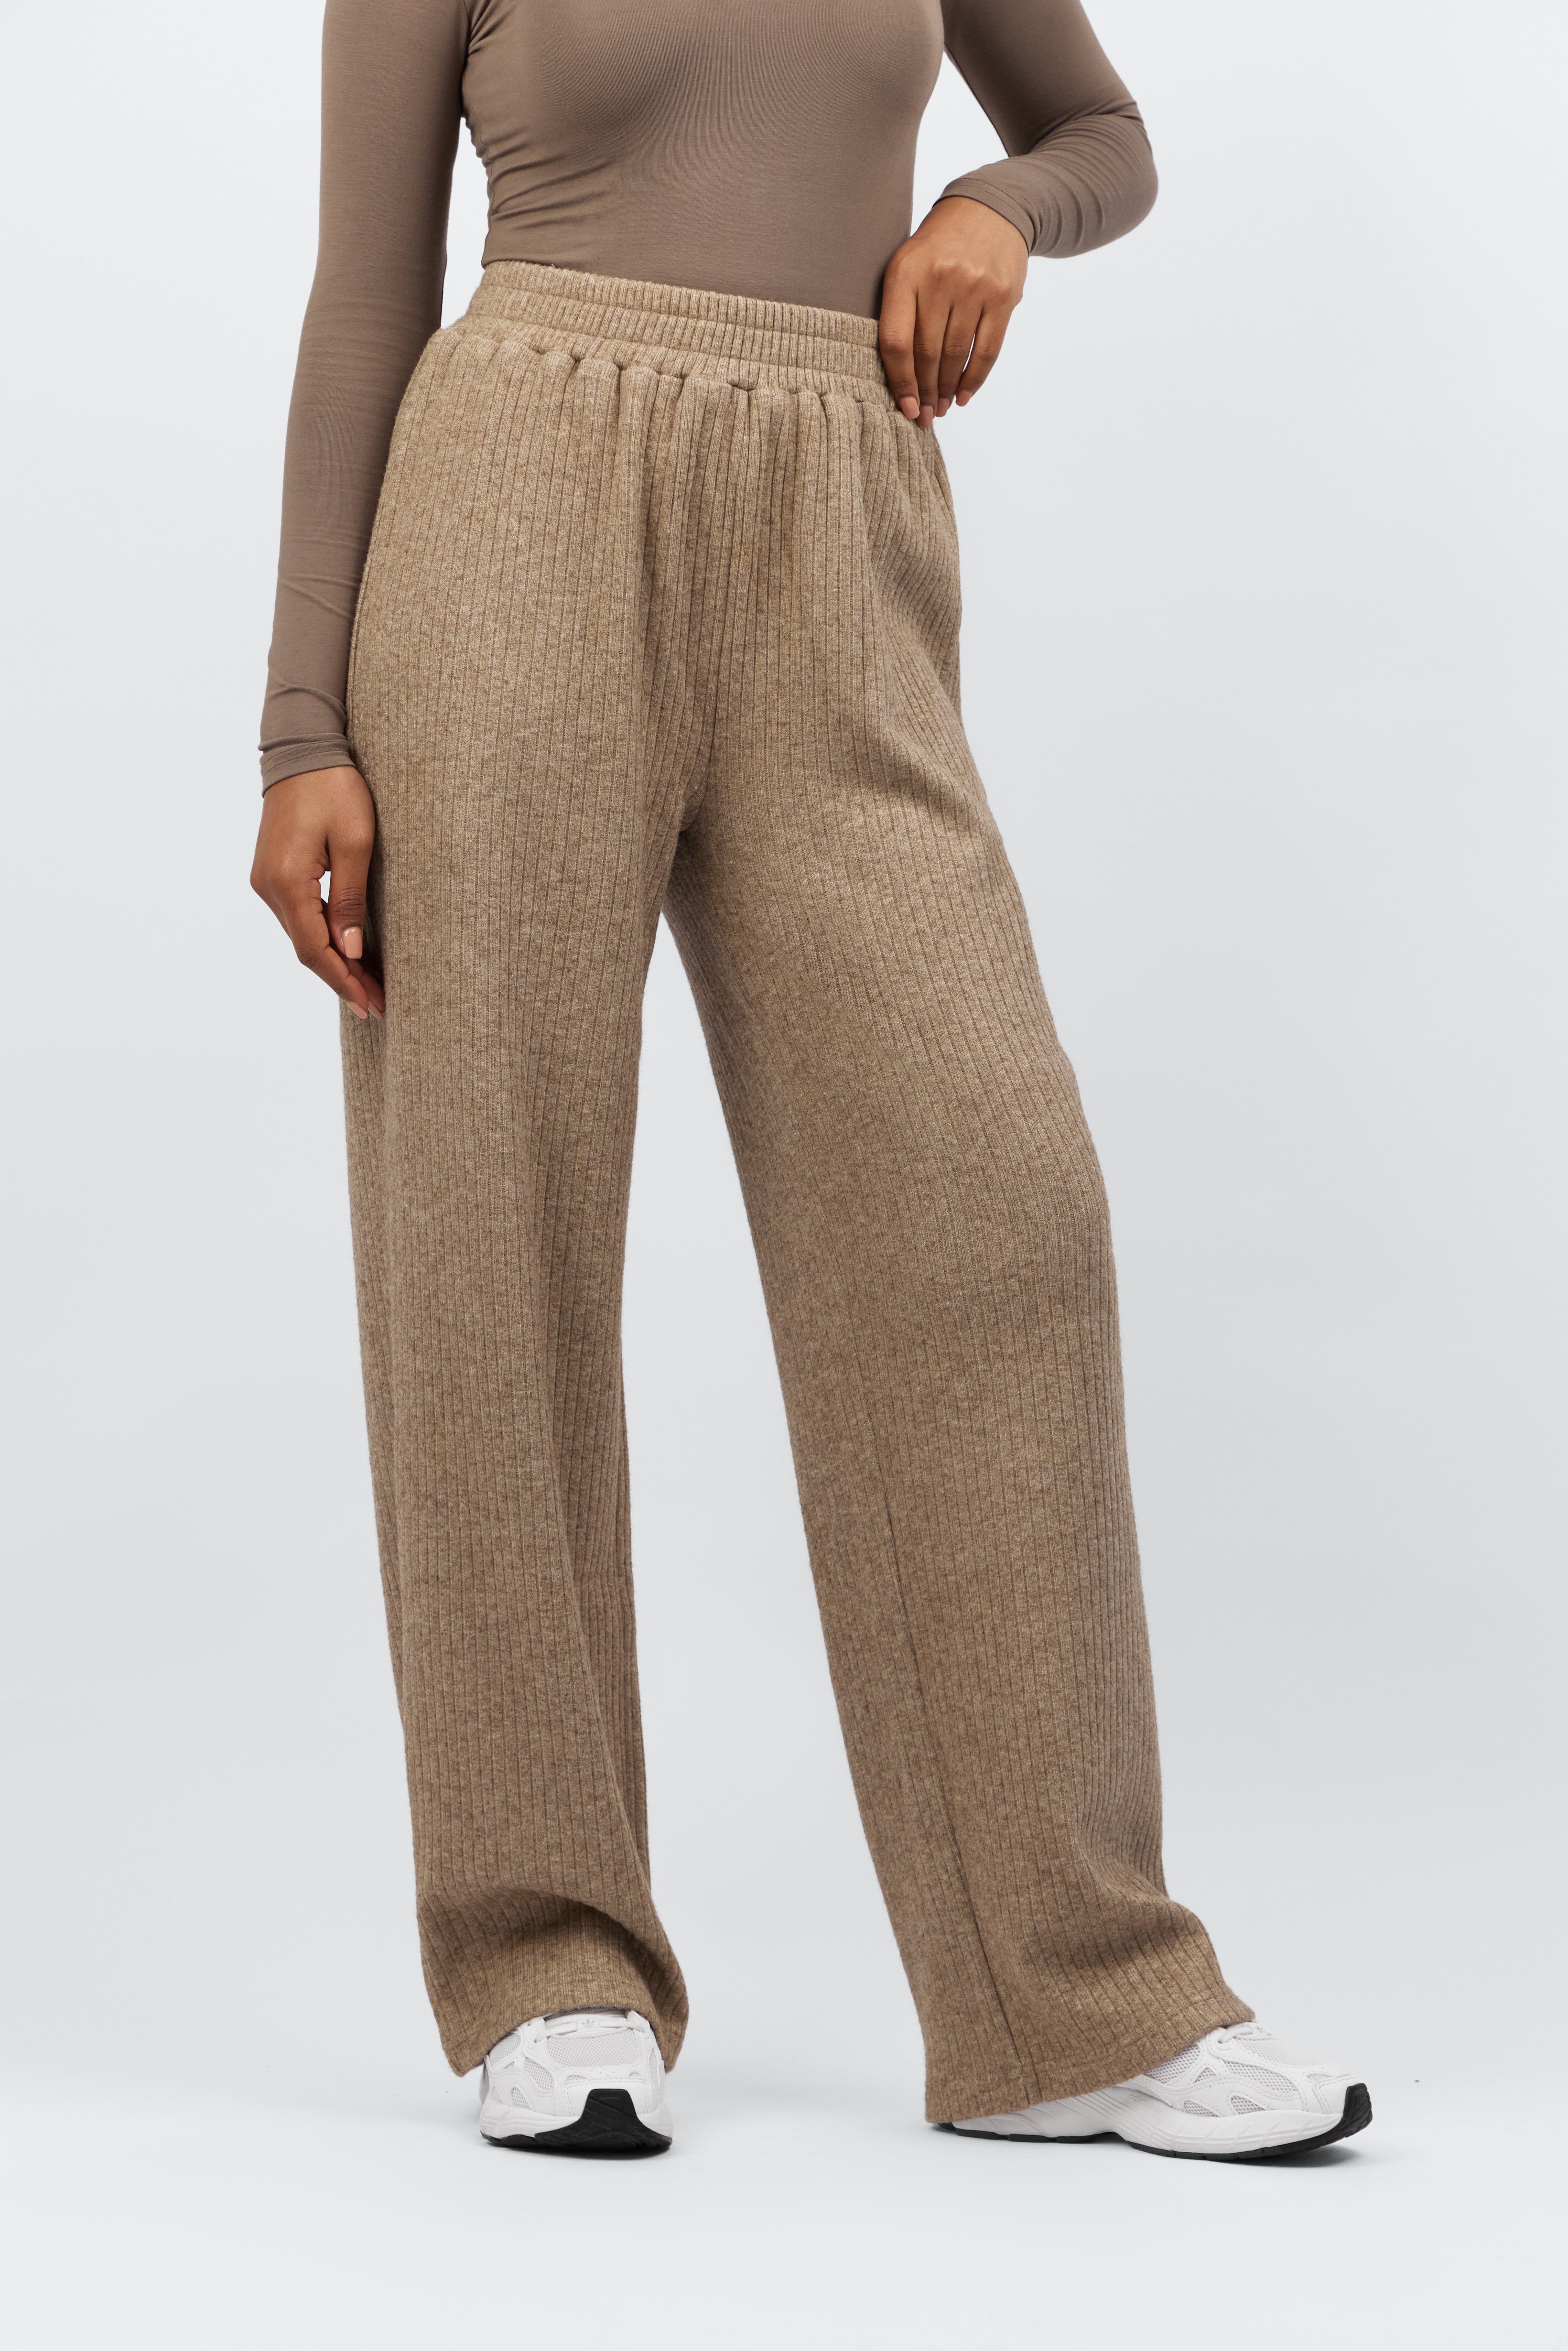 US - Knit Relaxed Fit Pants - Pecan